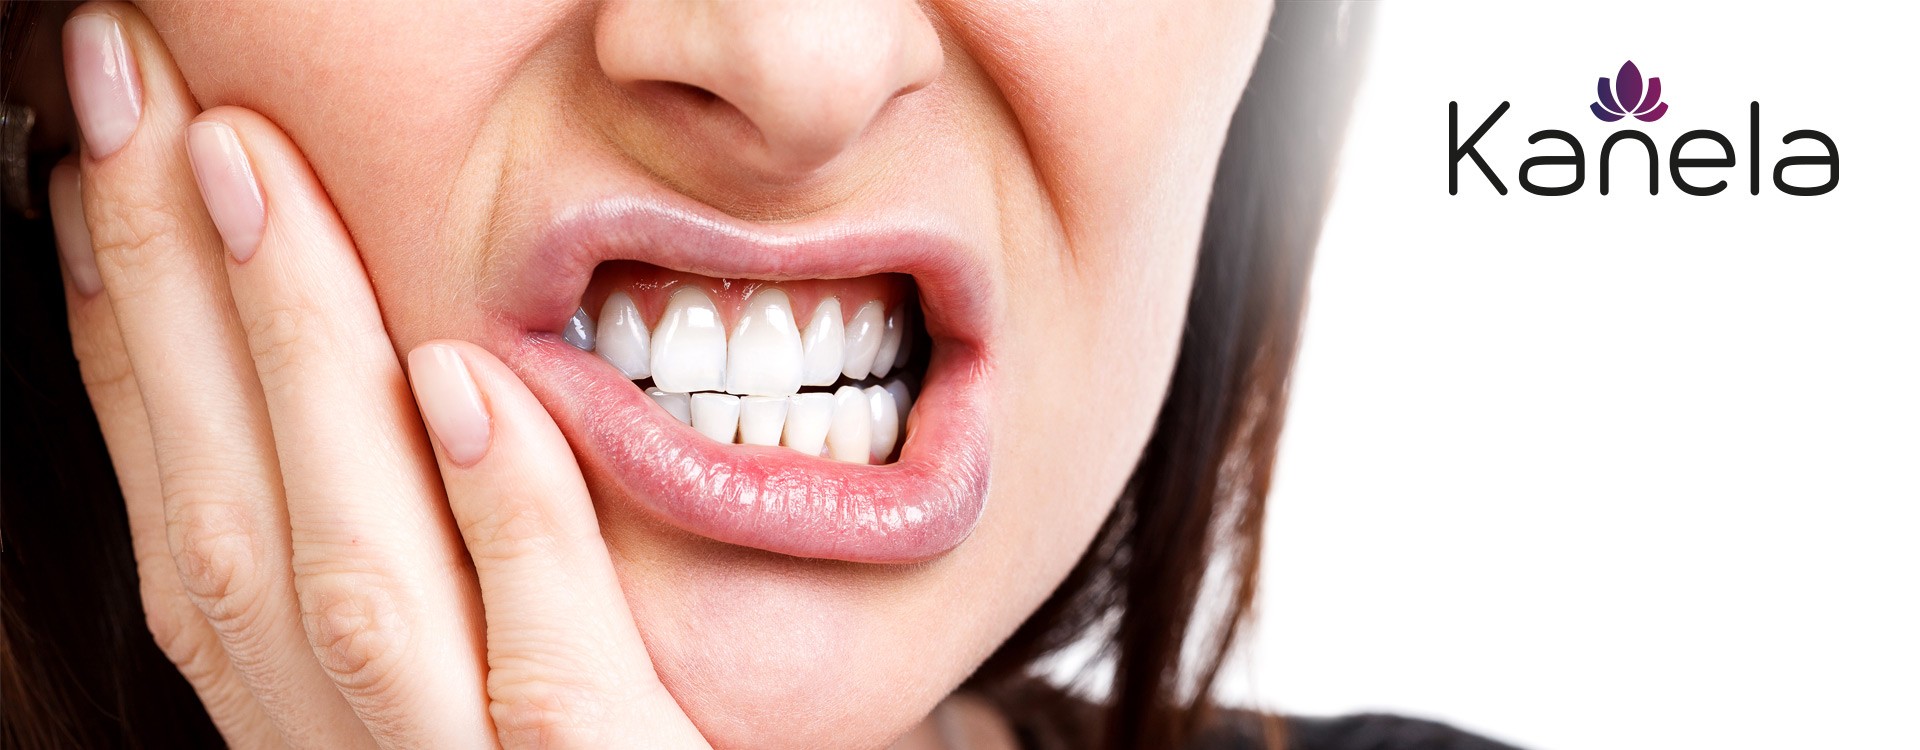 What can you do about aching gums?